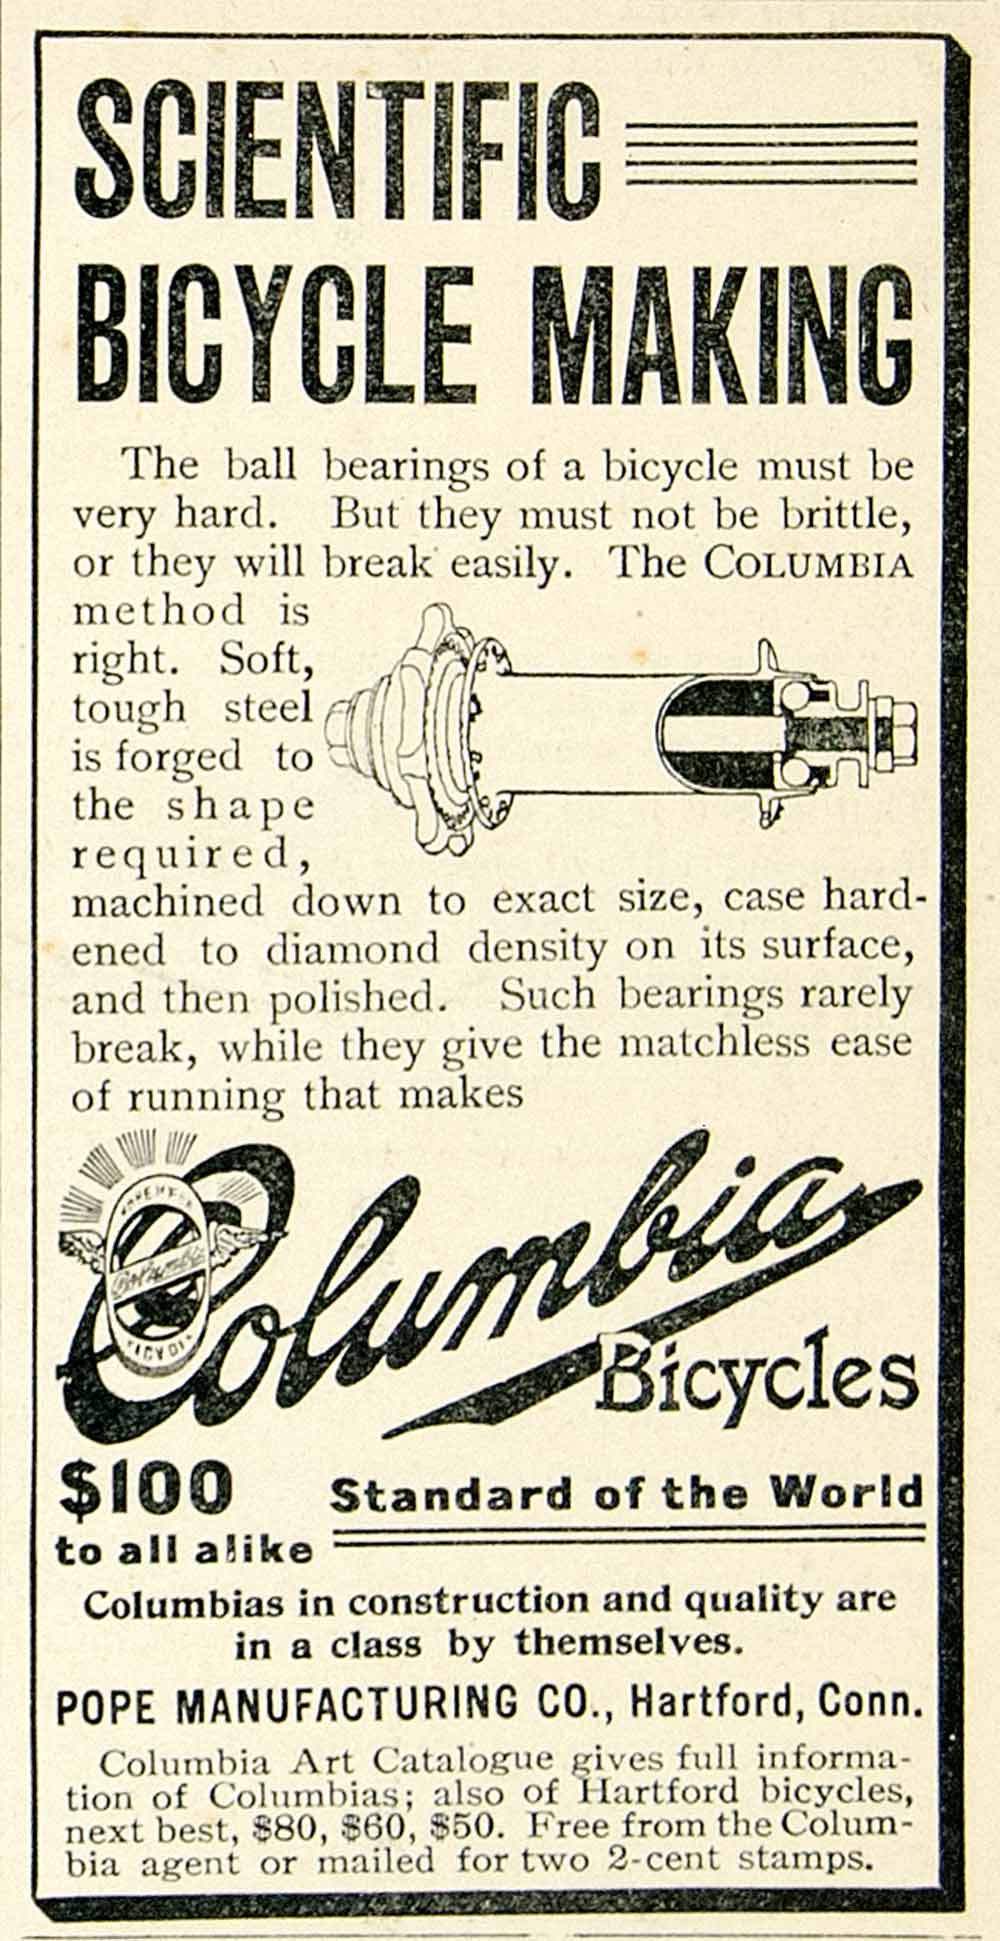 1896 Ad Columbia Bicycles Scientific Making Ball Bearing Mechanical Part CCG1